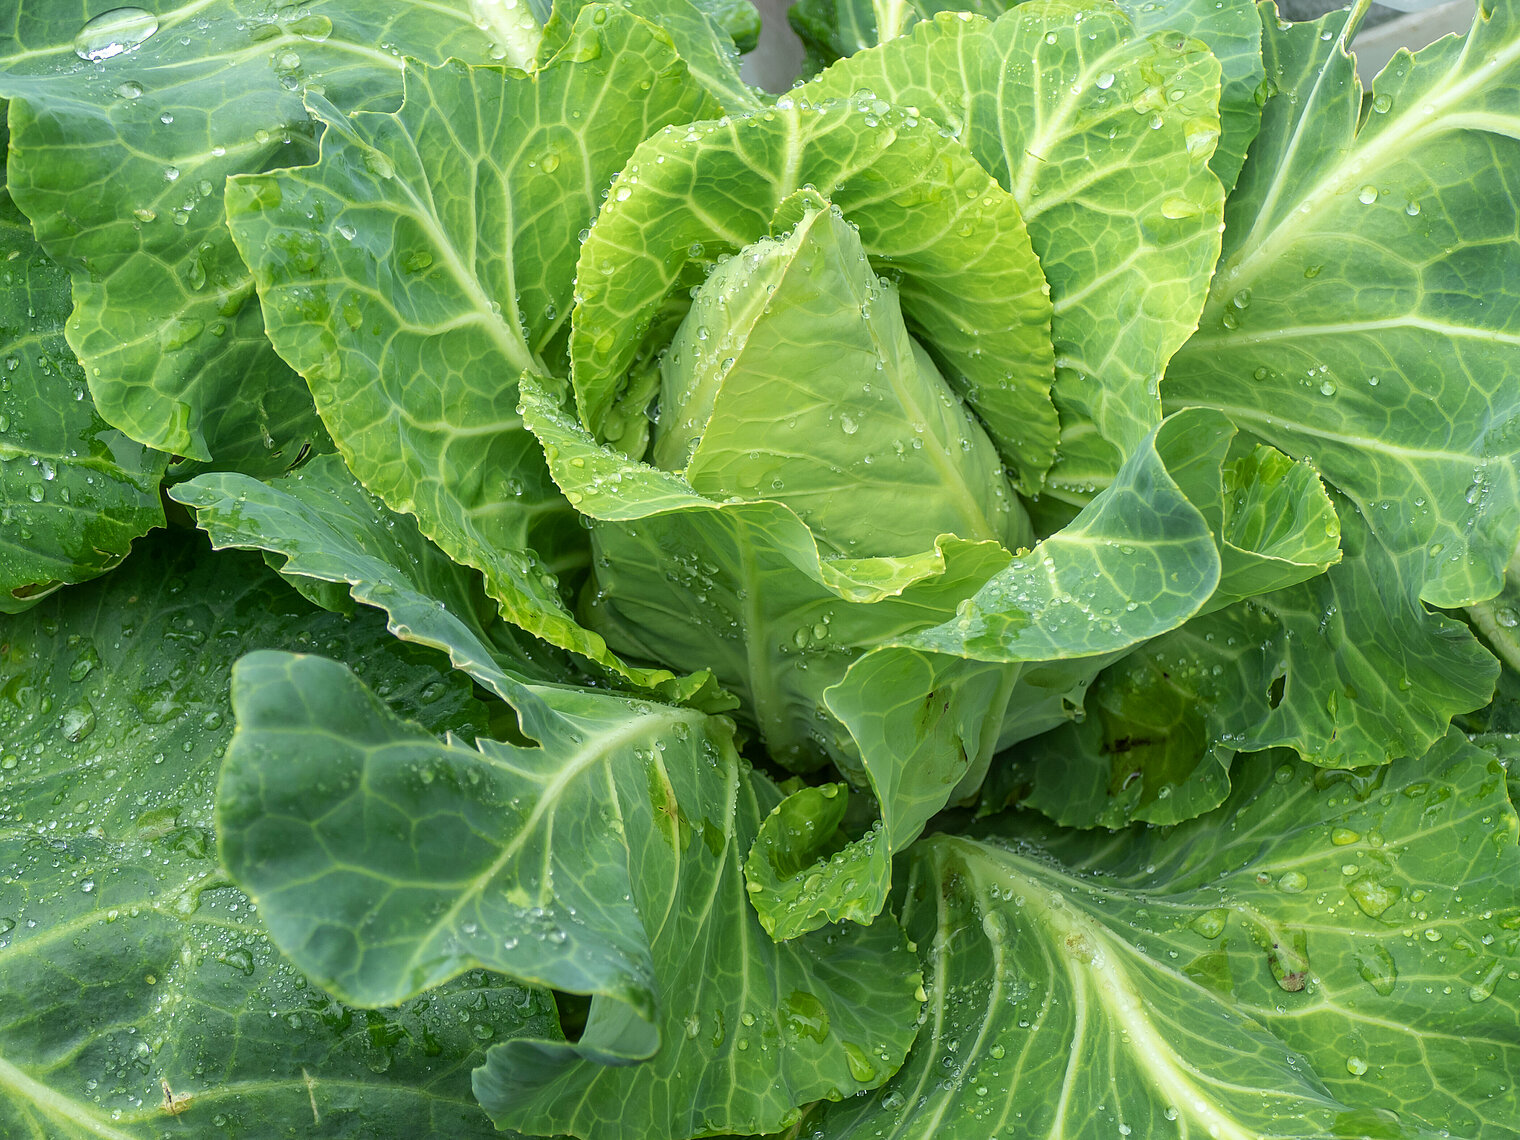 Pointed cabbage cultivation